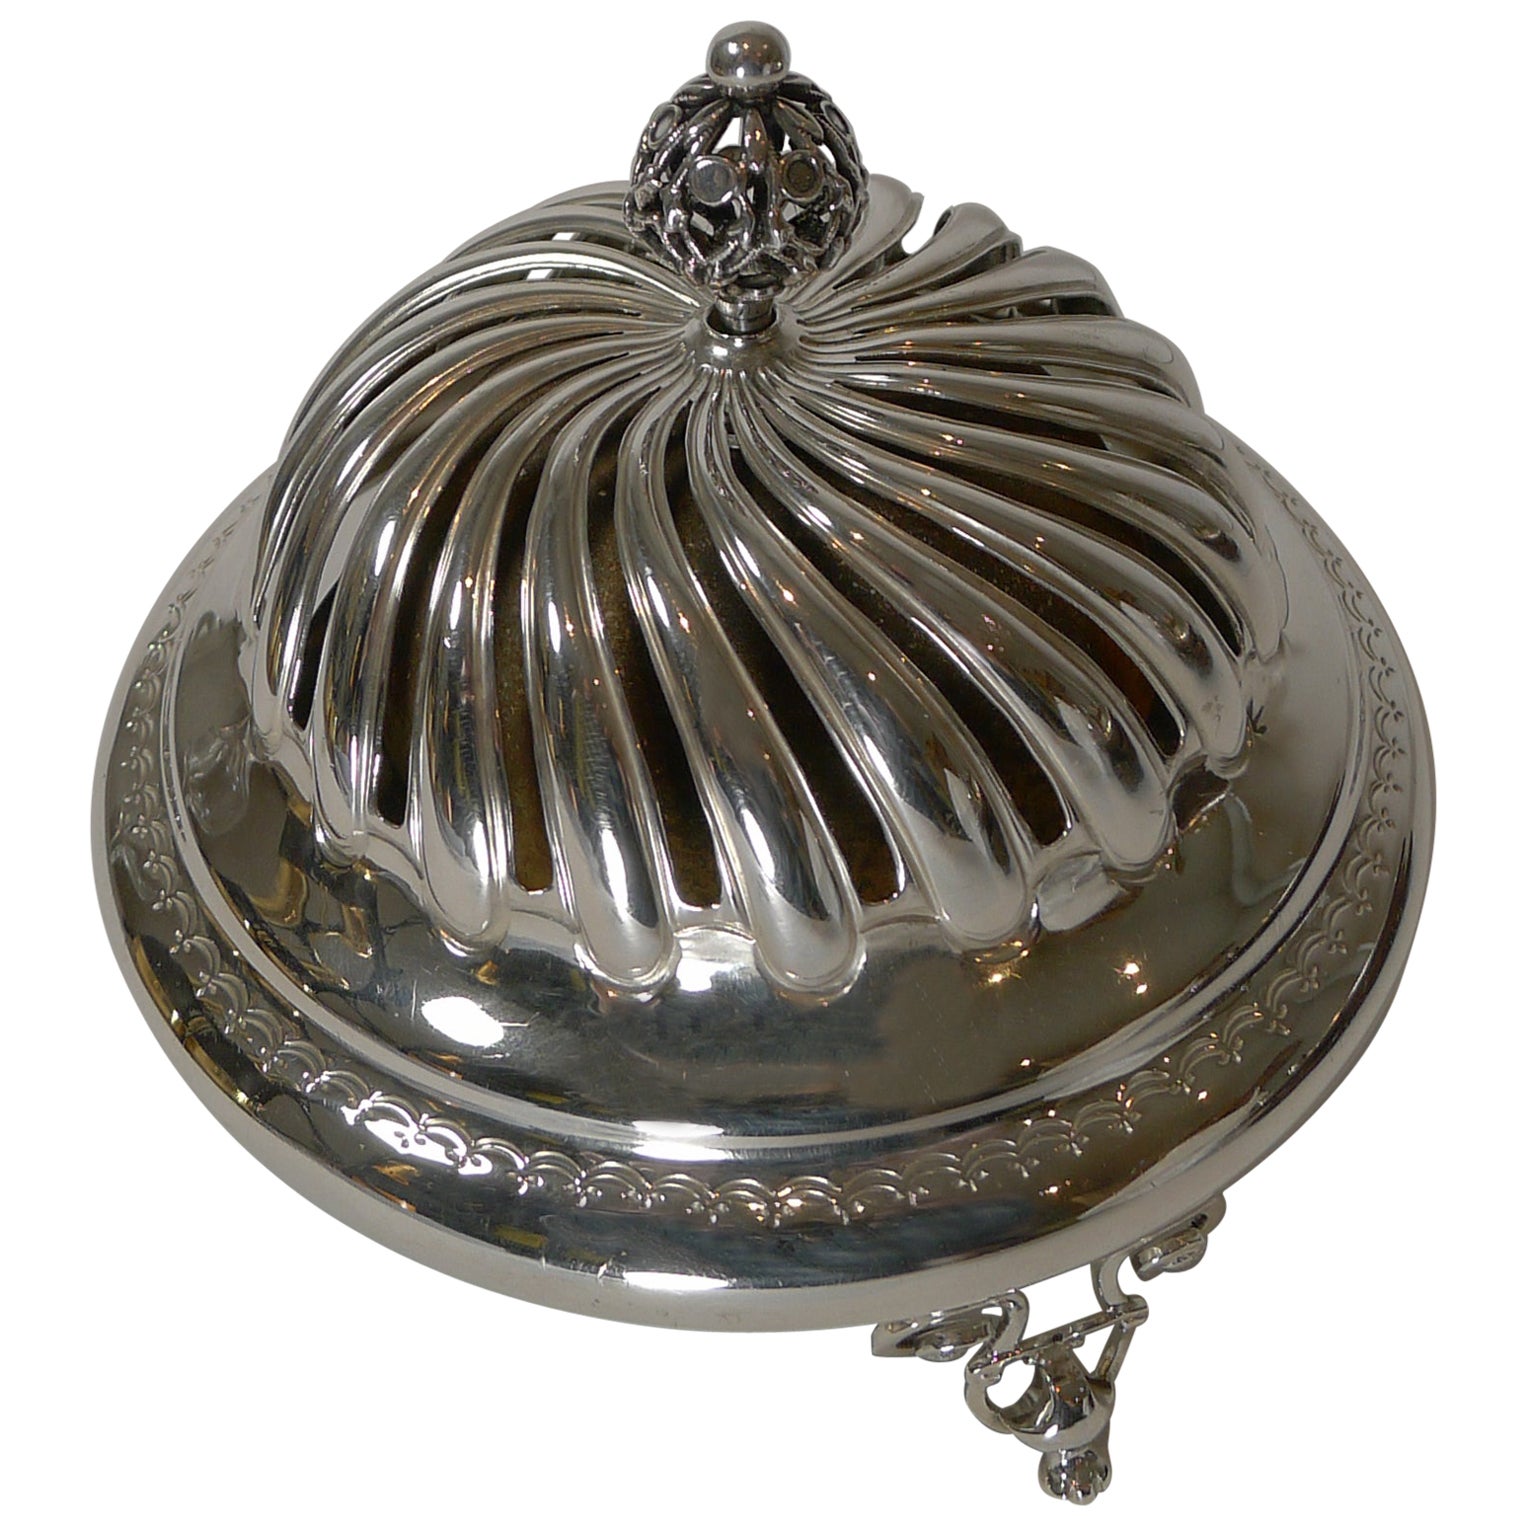 Rare Antique English Sterling Silver Table Bell, 1895 by George Unite